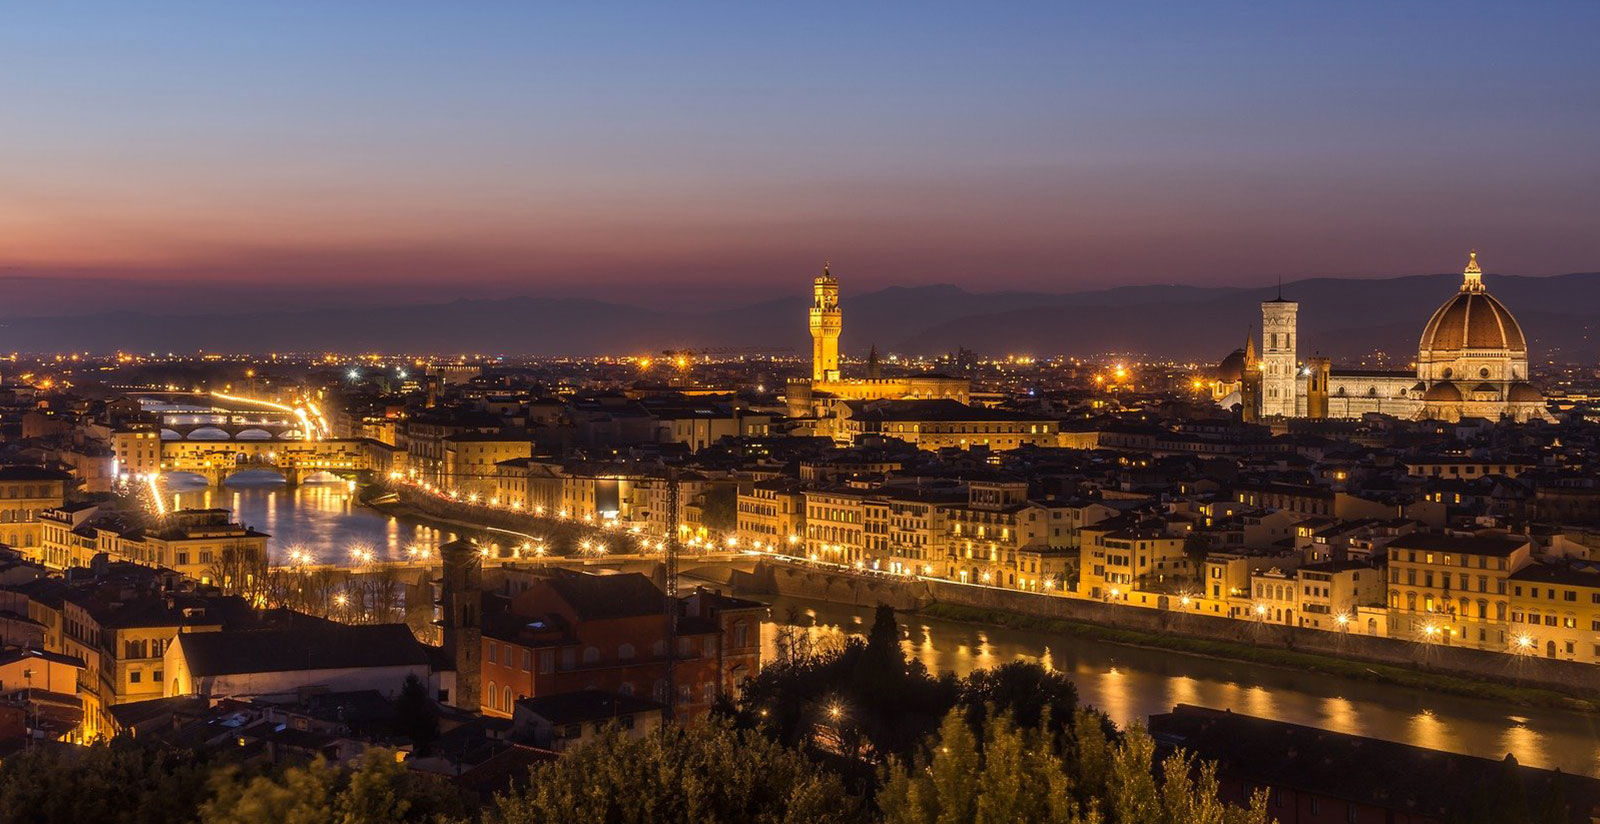 VISIT THE NEAR UFFIZI DURING YOUR STAY AT HOTEL PENDINI 3